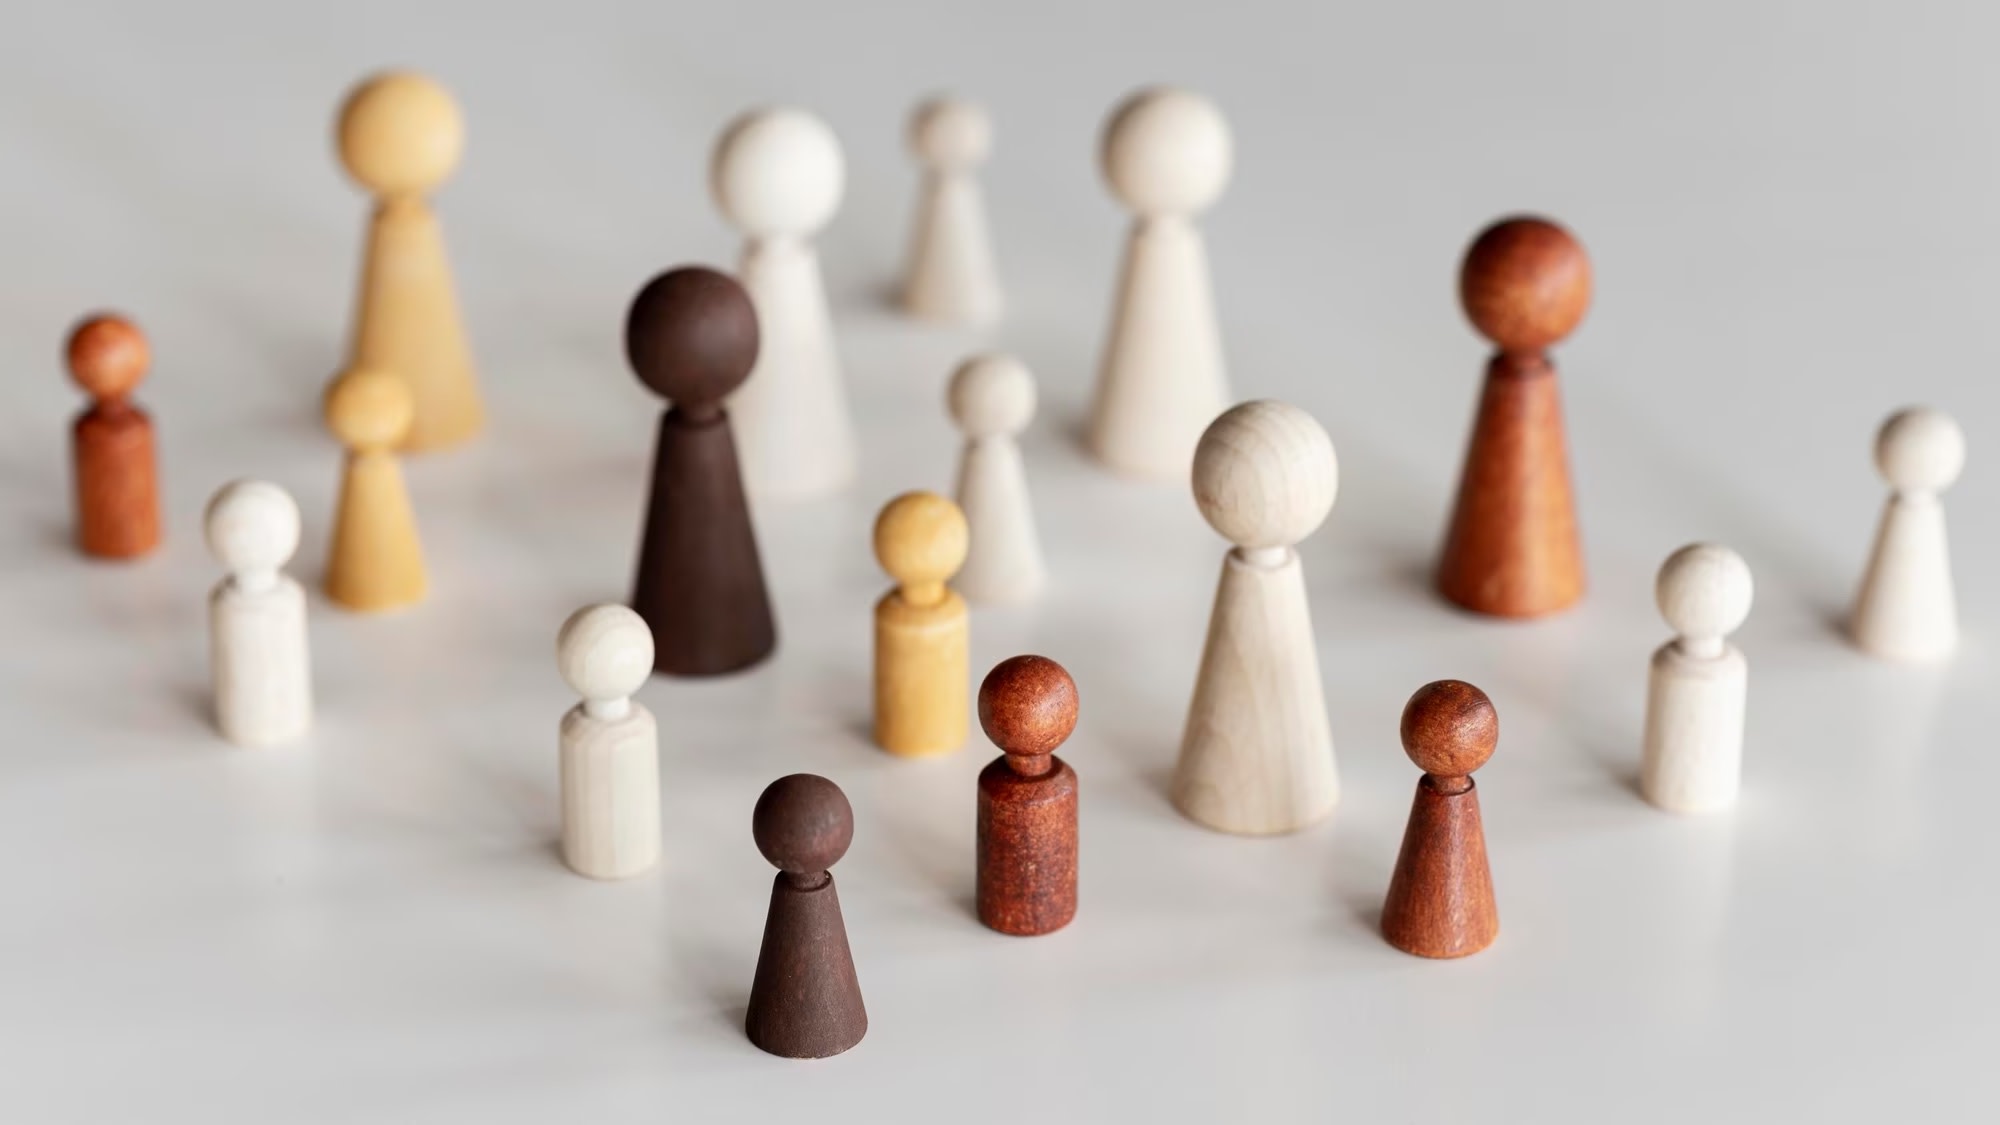 Image of diverse wooden game pieces representing human diversity